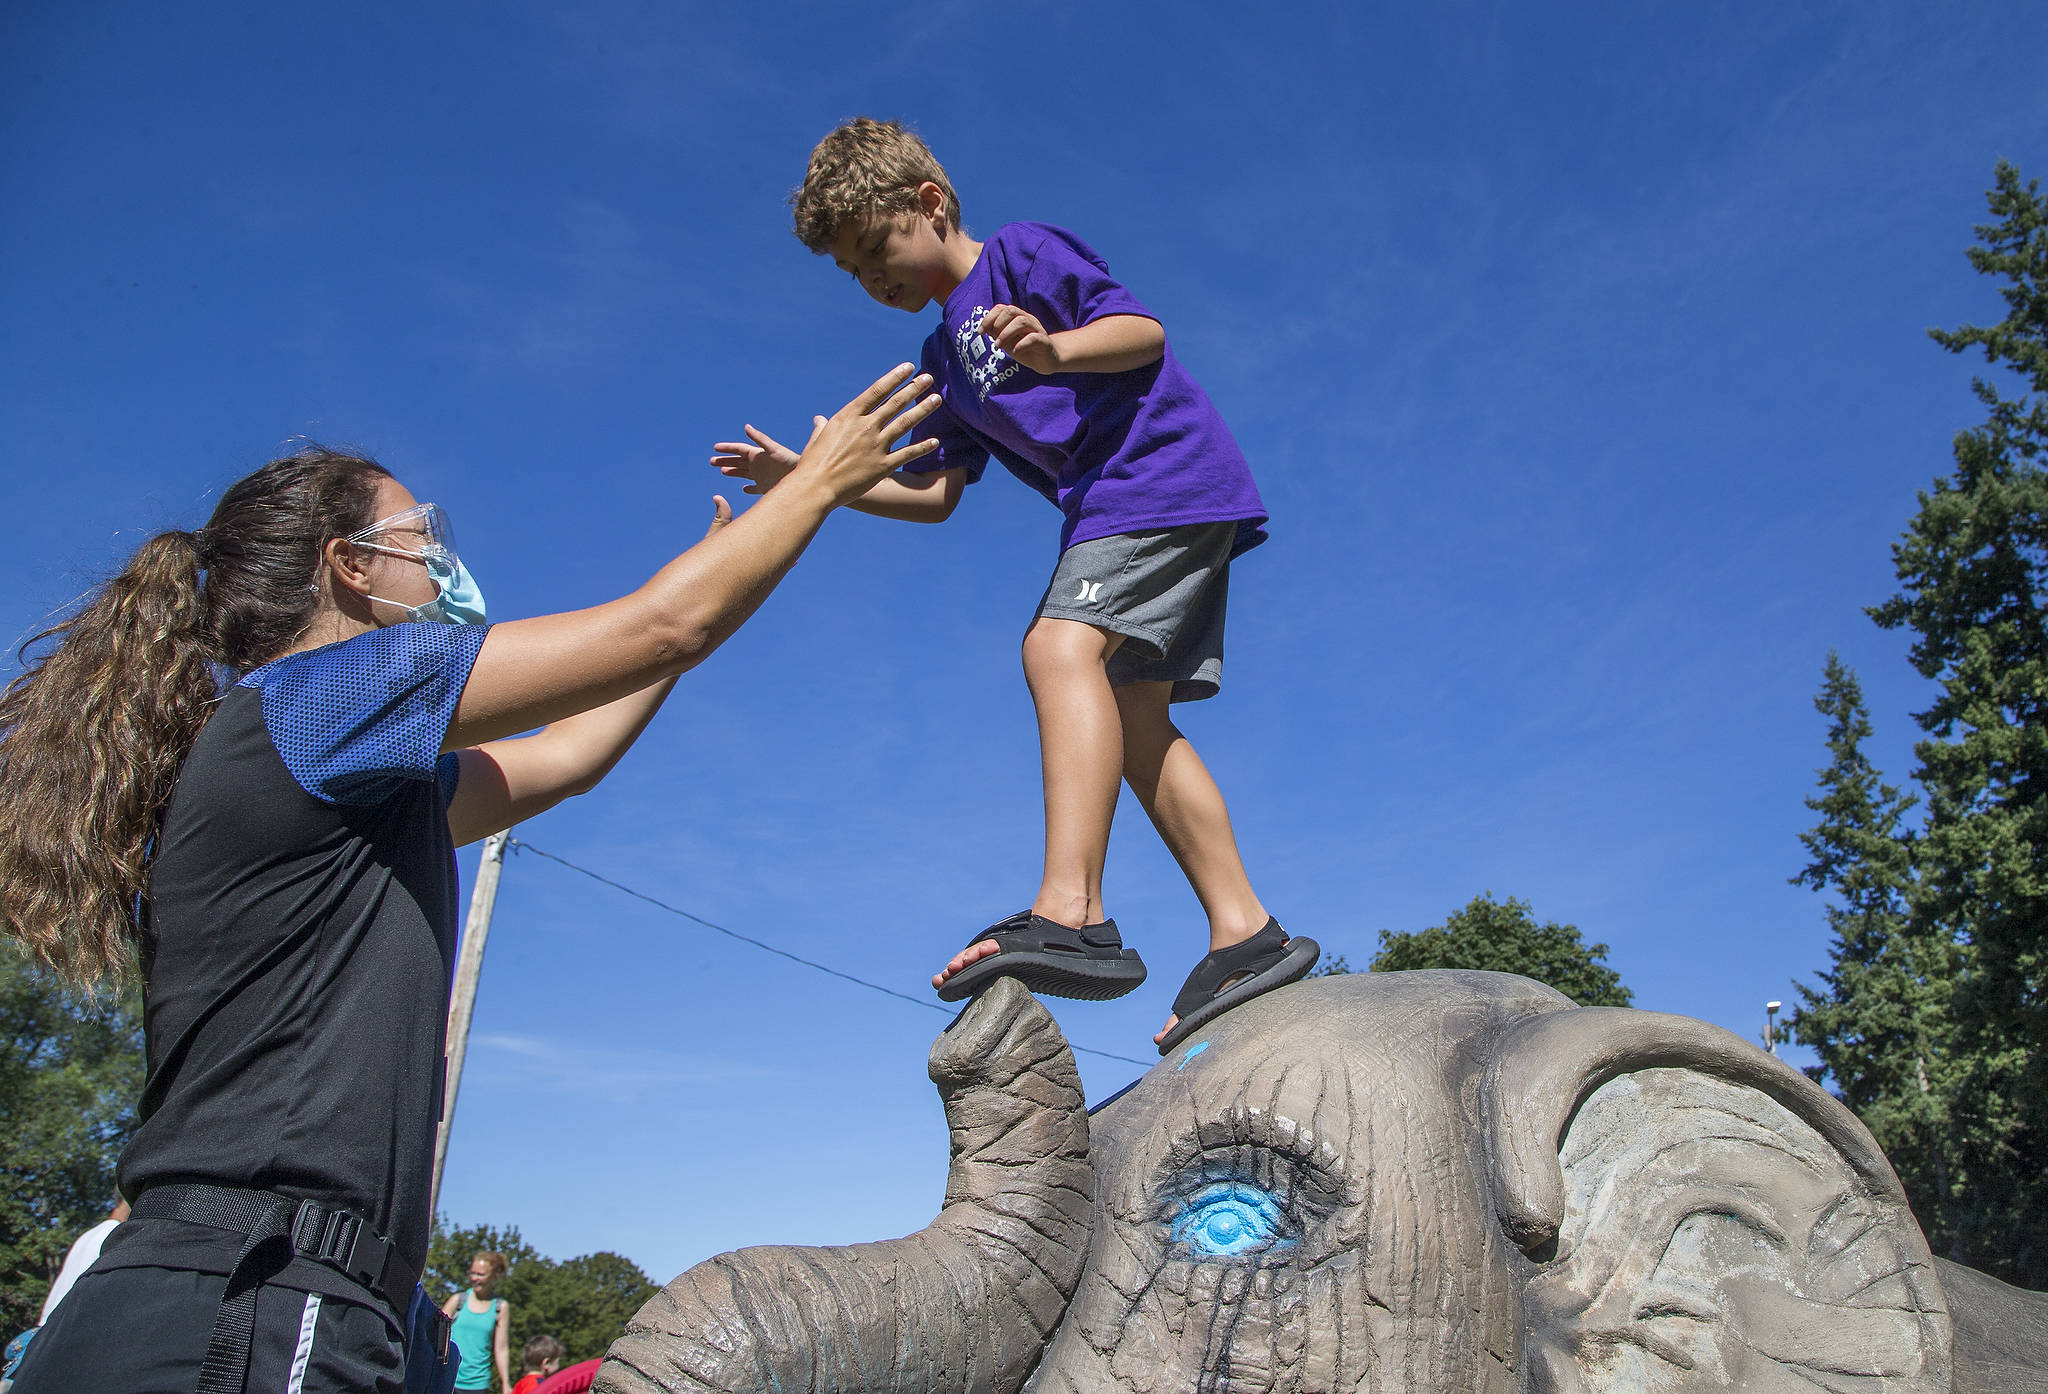 Haaken Williams, 6, balances on the nose of an elephant sculpture at Forest Park as Camp Prov unit leader Megan Pfohl reaches out during a playground break in Everett. (Andy Bronson / The Herald)